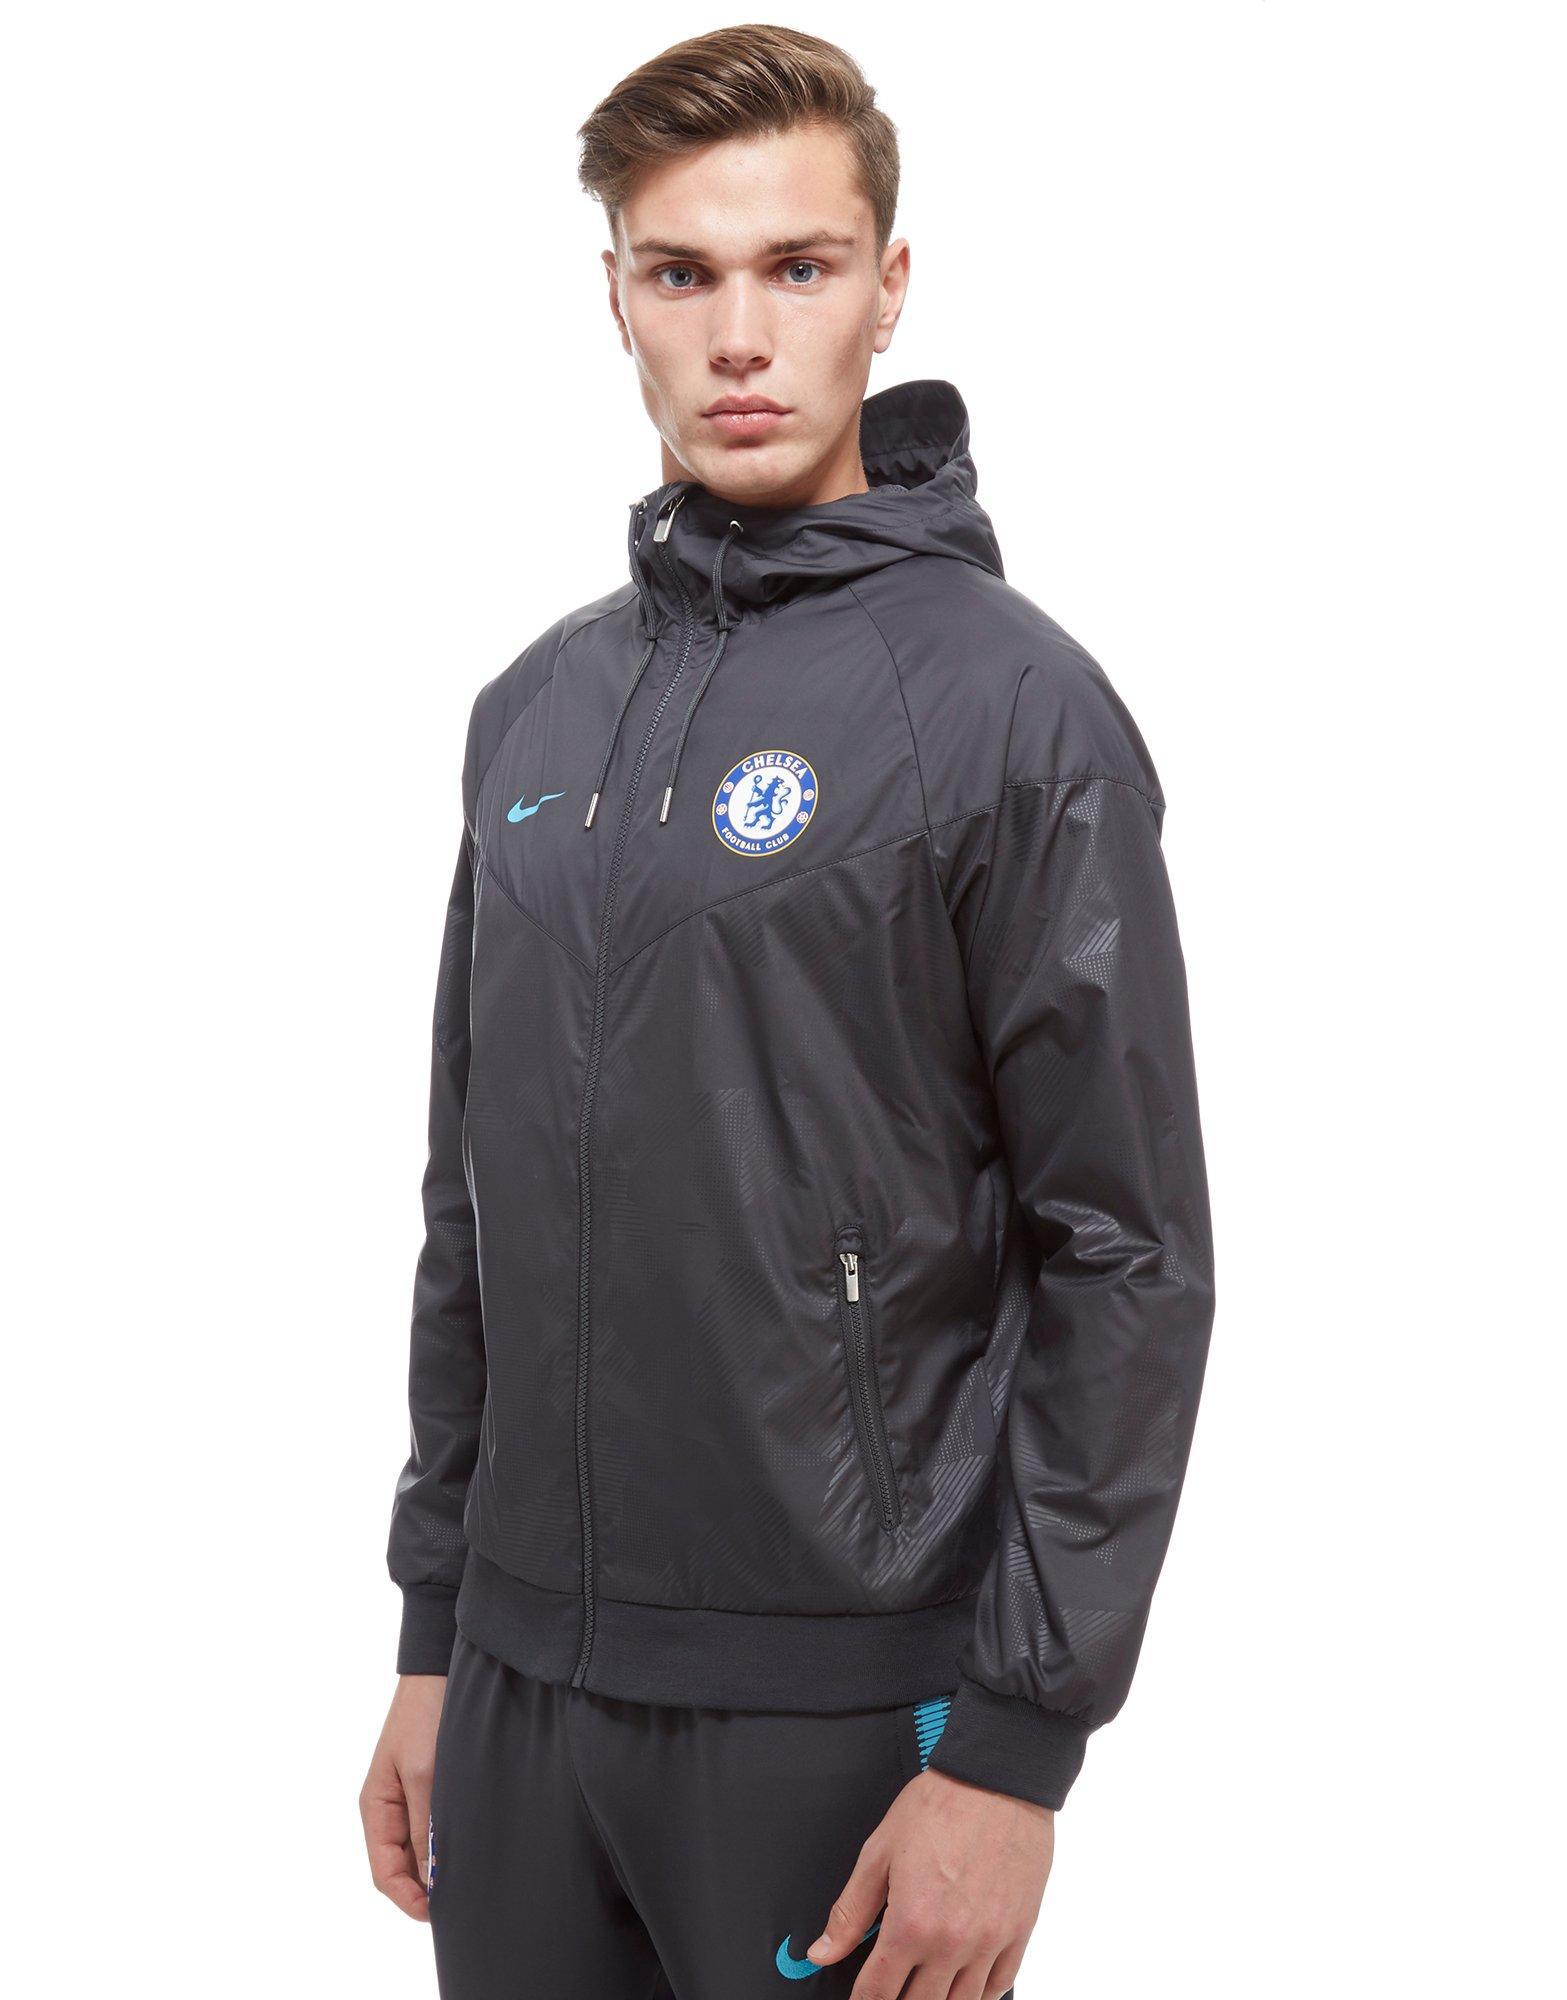 Find Out 38+ List About Chelsea Fc Jacket Nike They Forgot to Let You ...